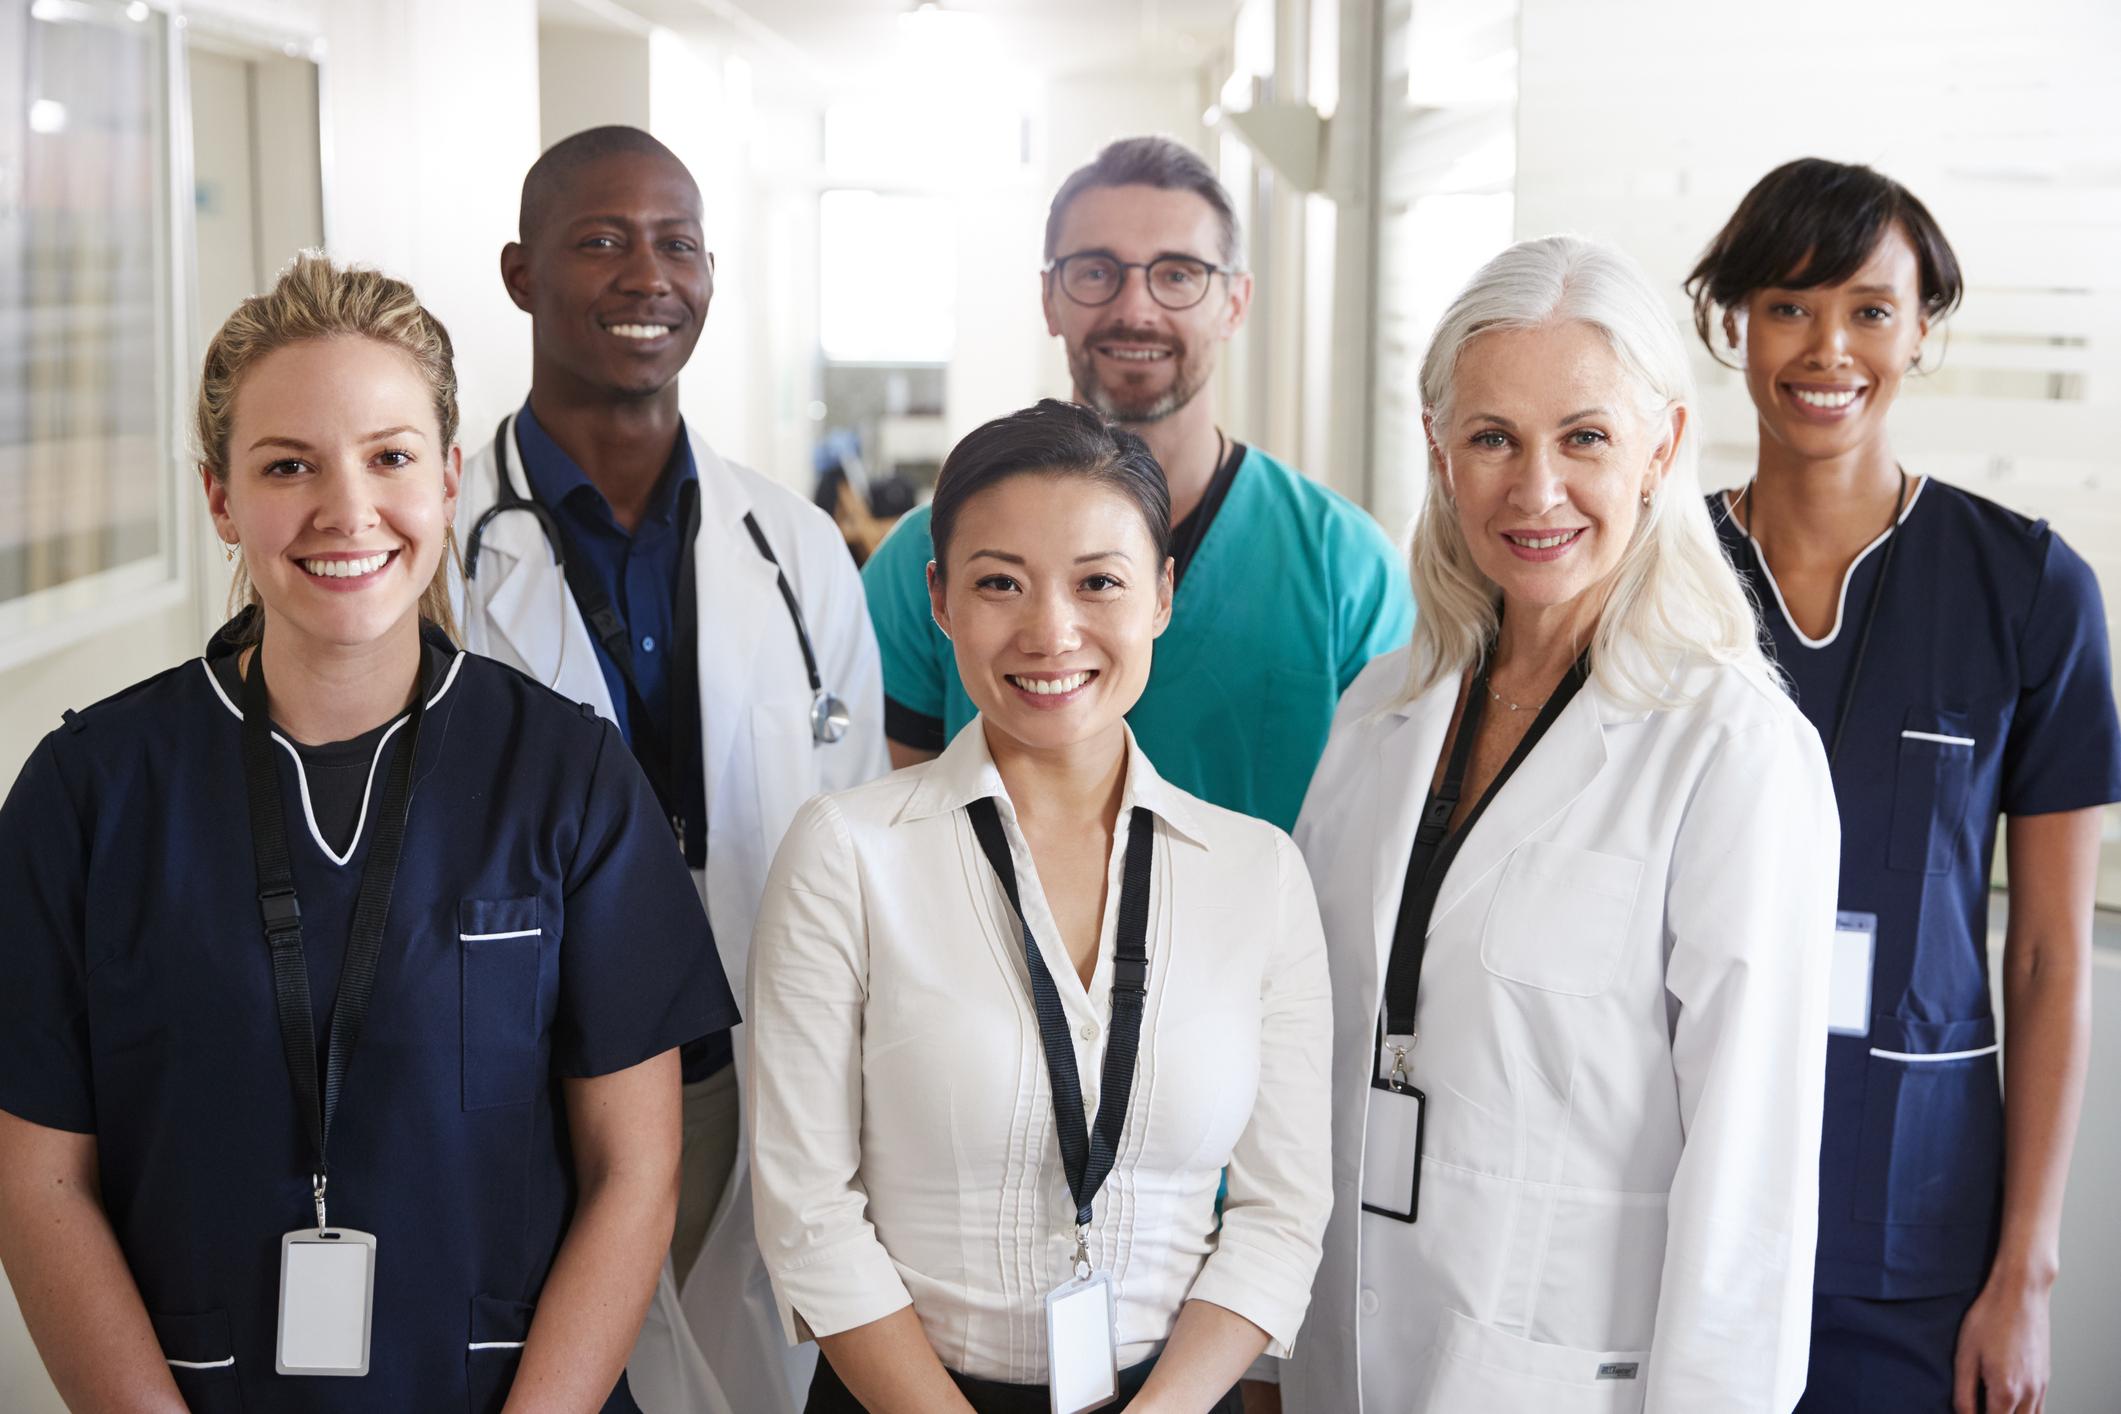 Portrait of a medical team in a hospital including doctors, nurses and allied health professionals.